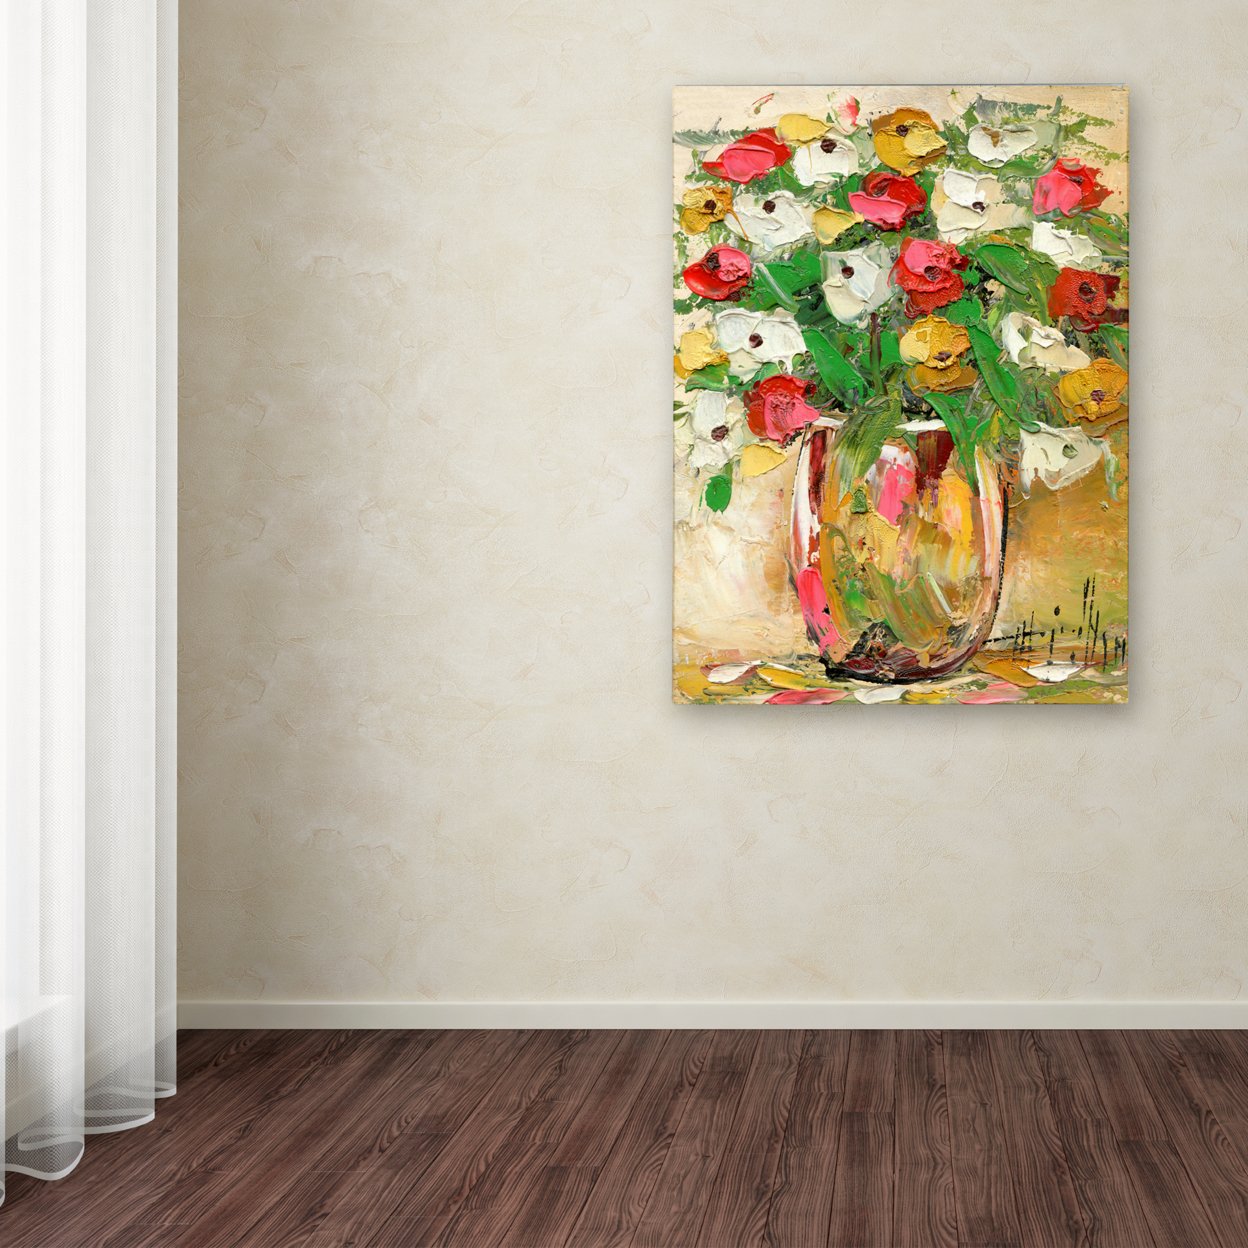 Hai Odelia 'Spring Flowers In A Vase 7' Canvas Wall Art 35 X 47 Inches